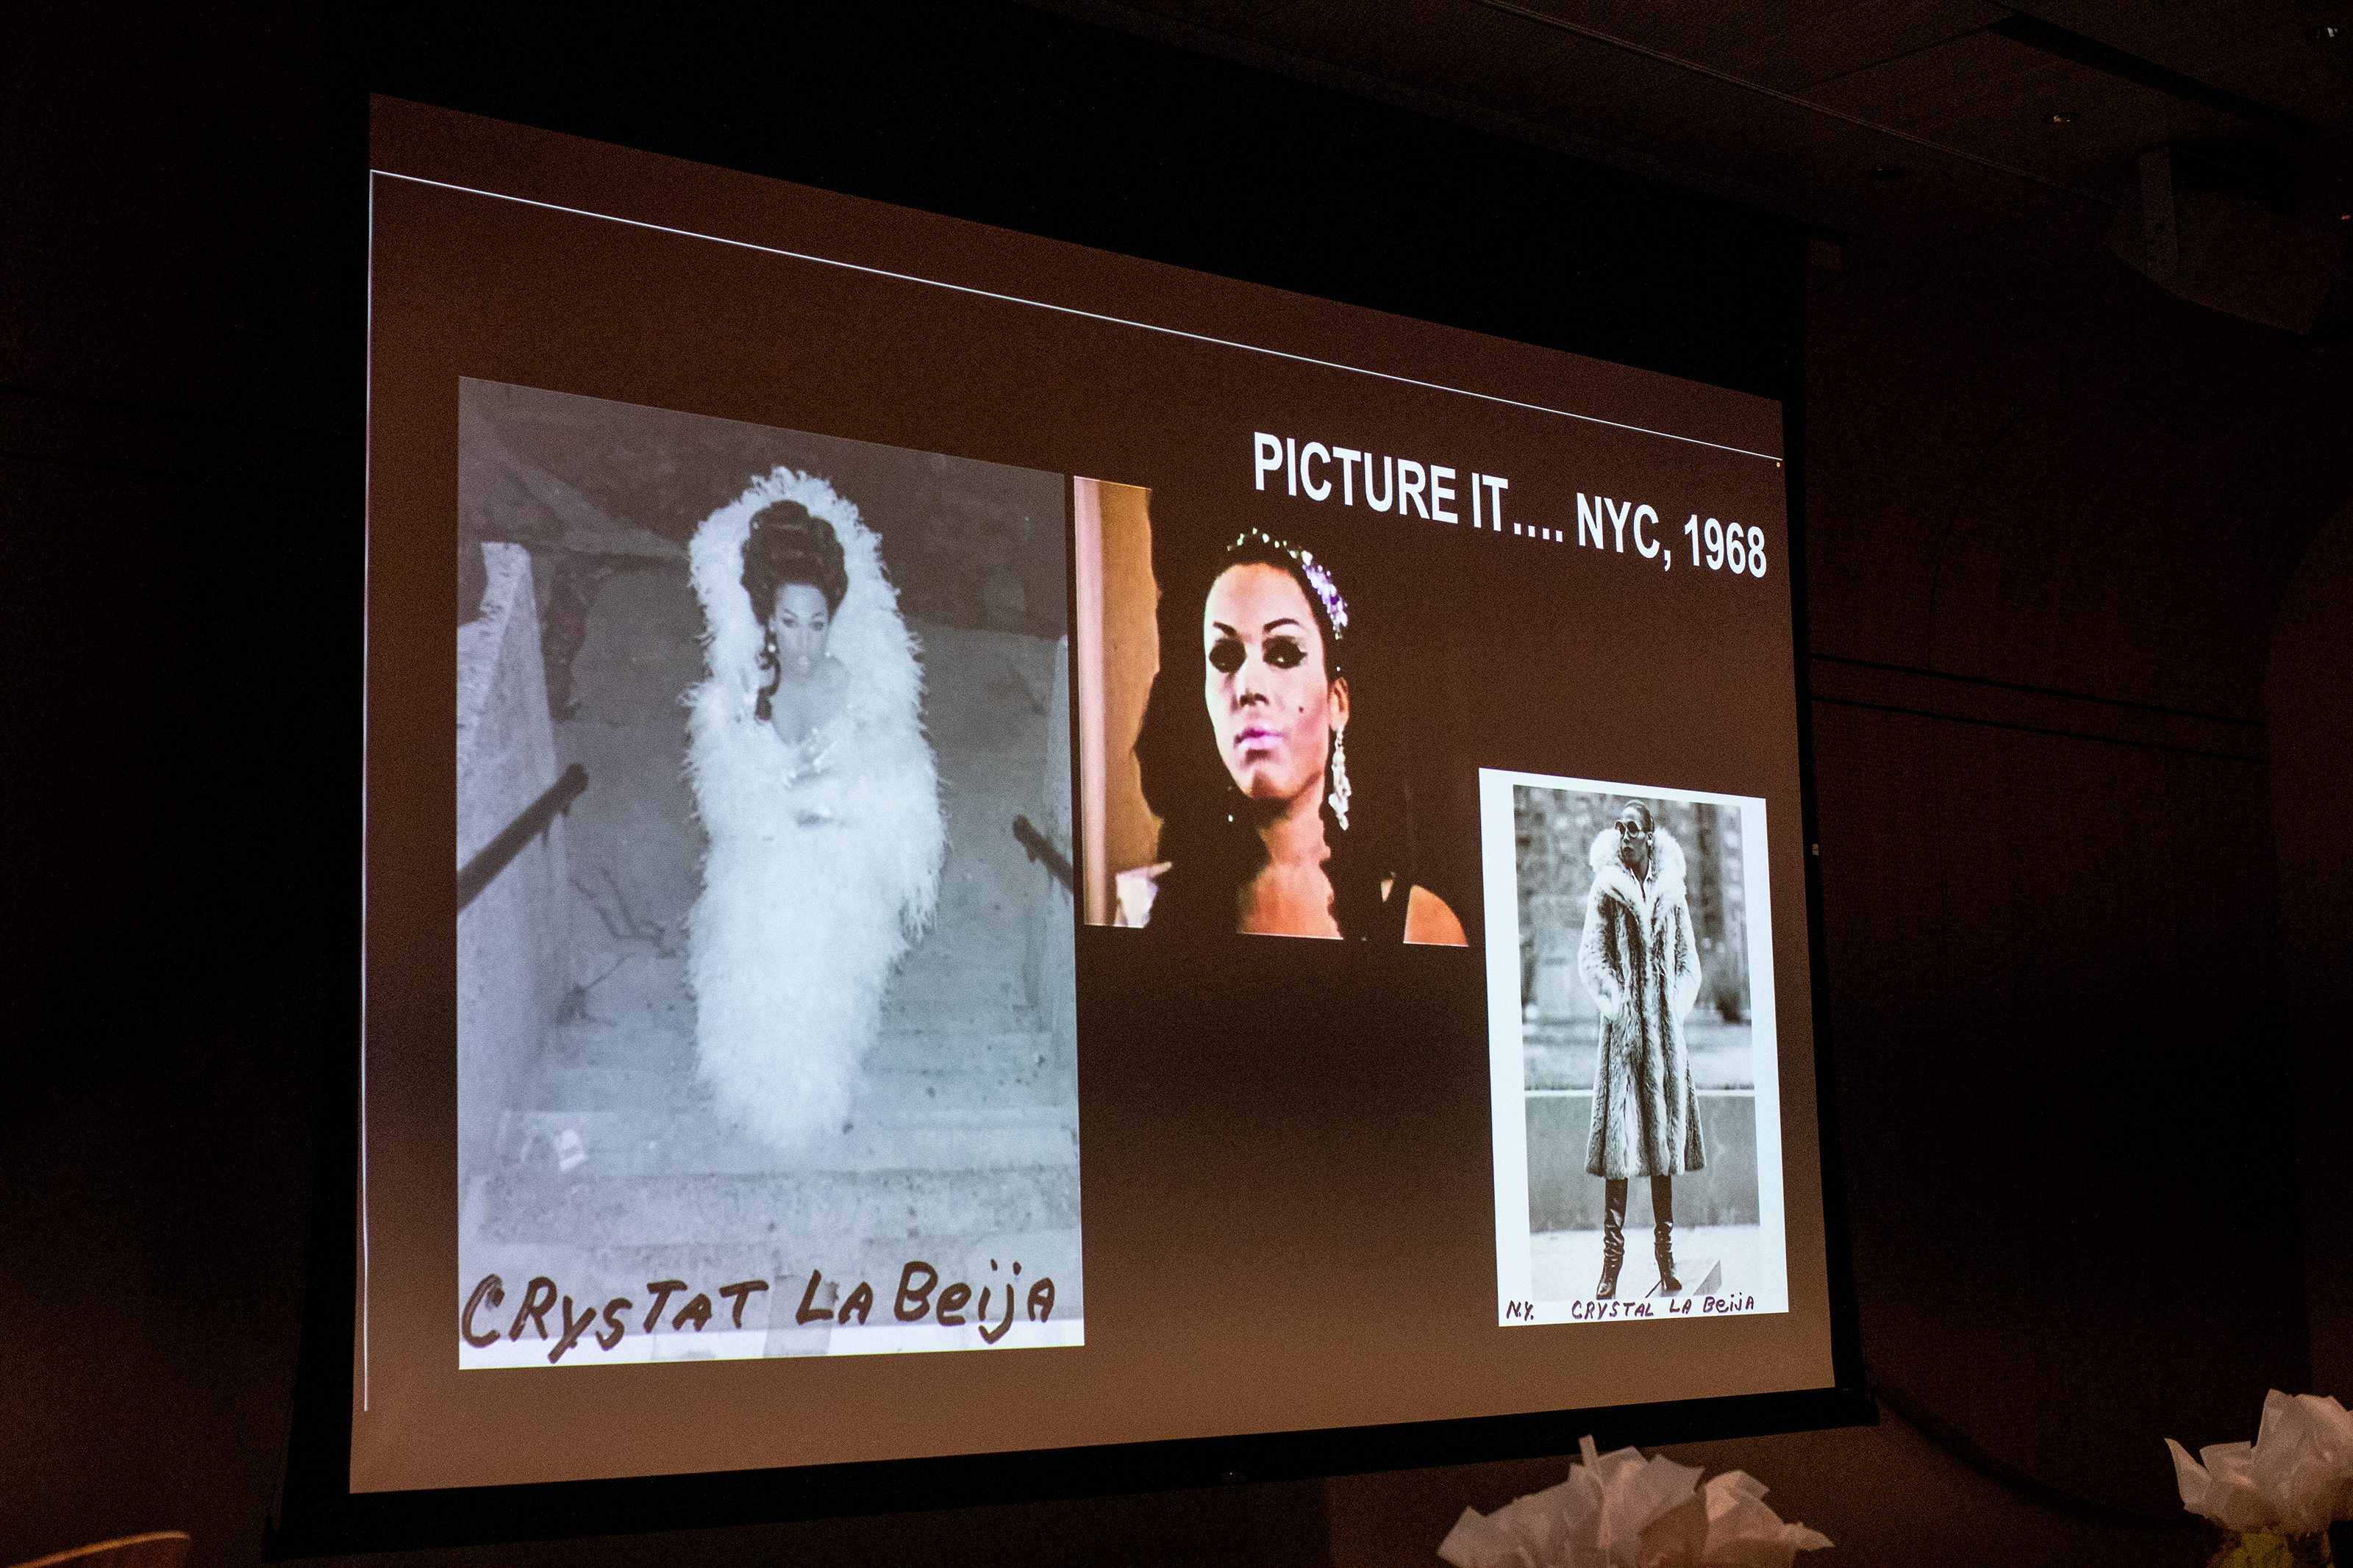 Photos and video clips of Crystal LaBeija projected in the Washington Place Auditorium